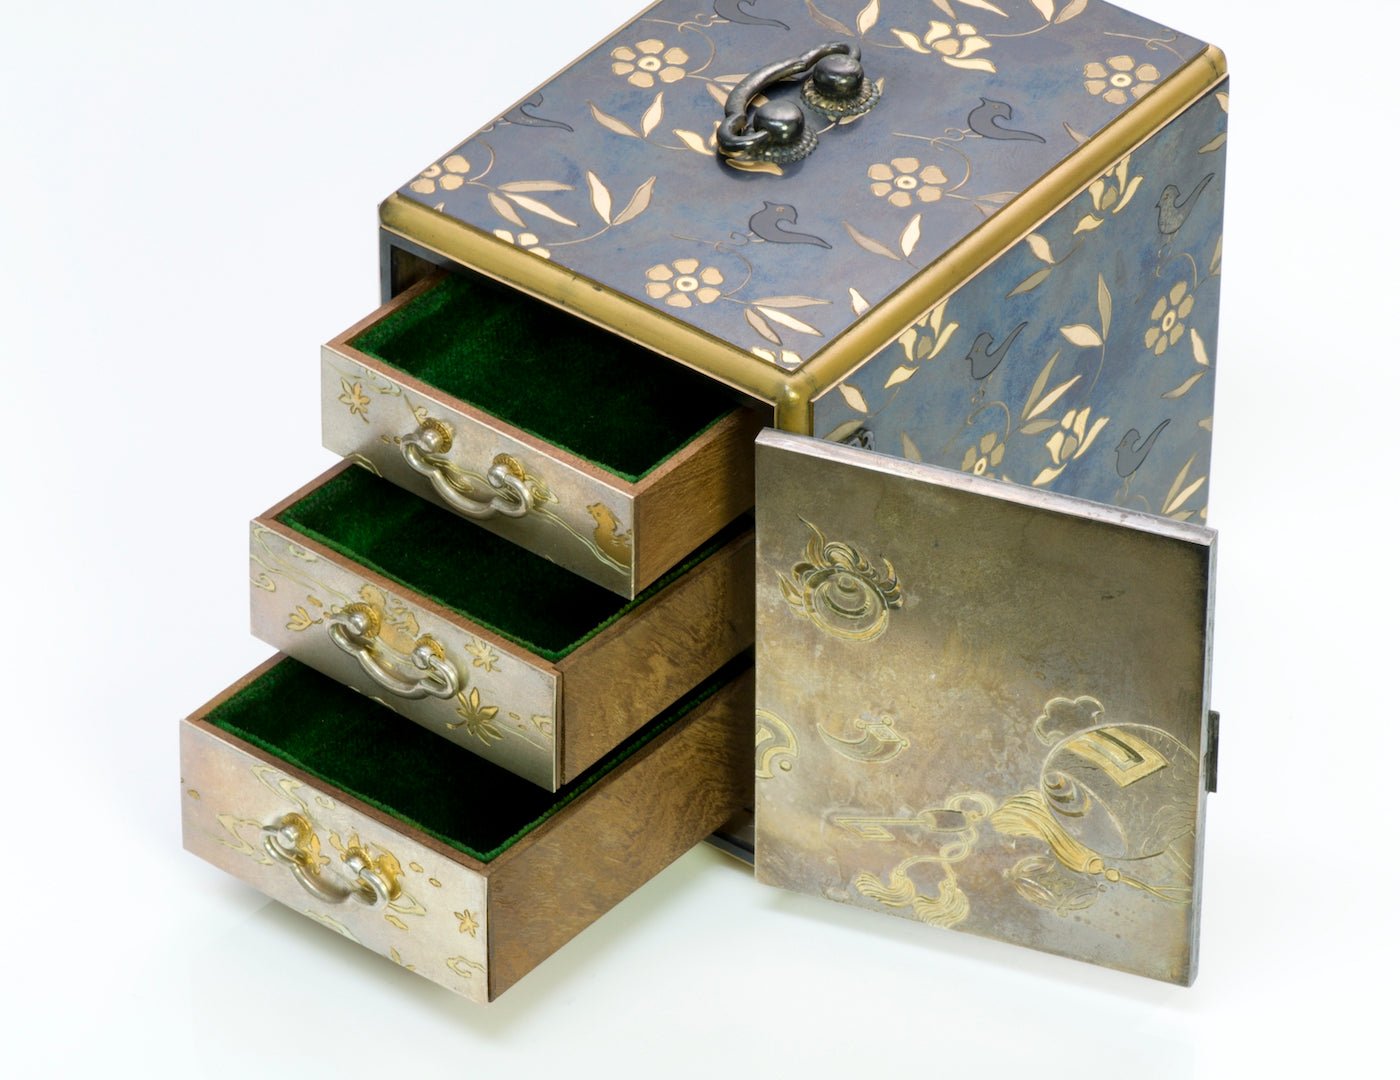 Antique Japanese Jewelry Box - DSF Antique Jewelry